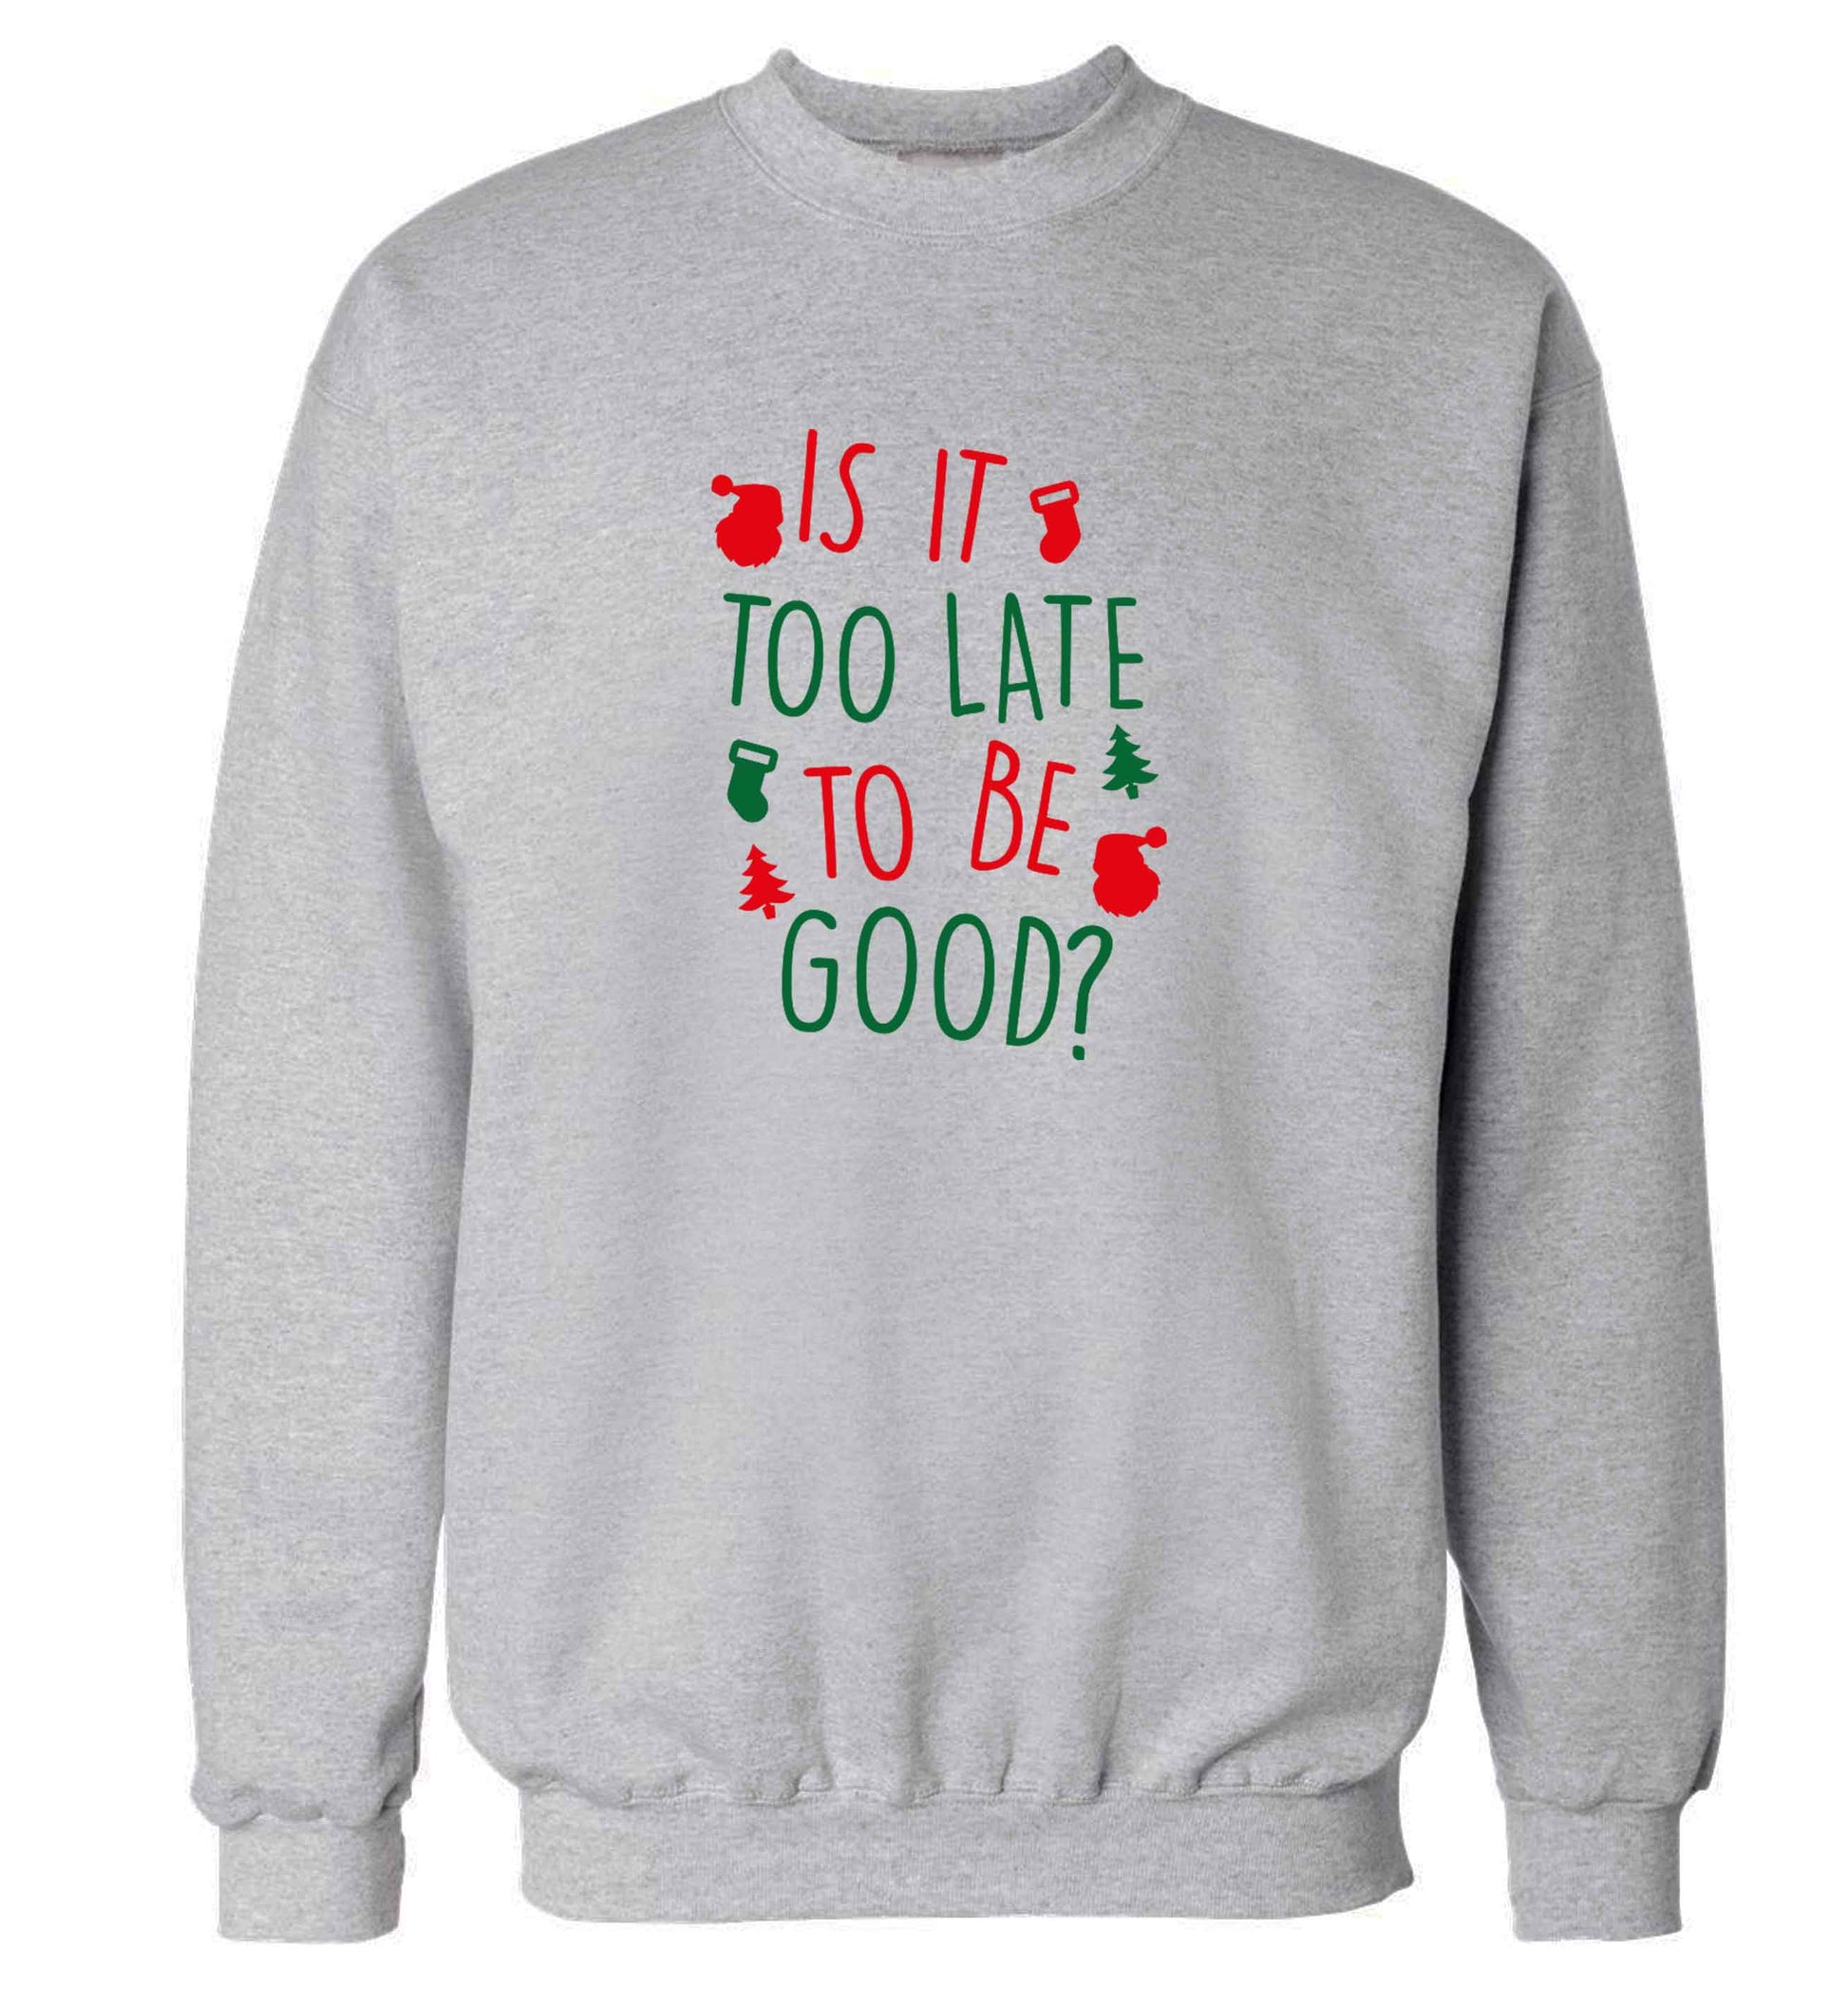 Too Late to be Good adult's unisex grey sweater 2XL